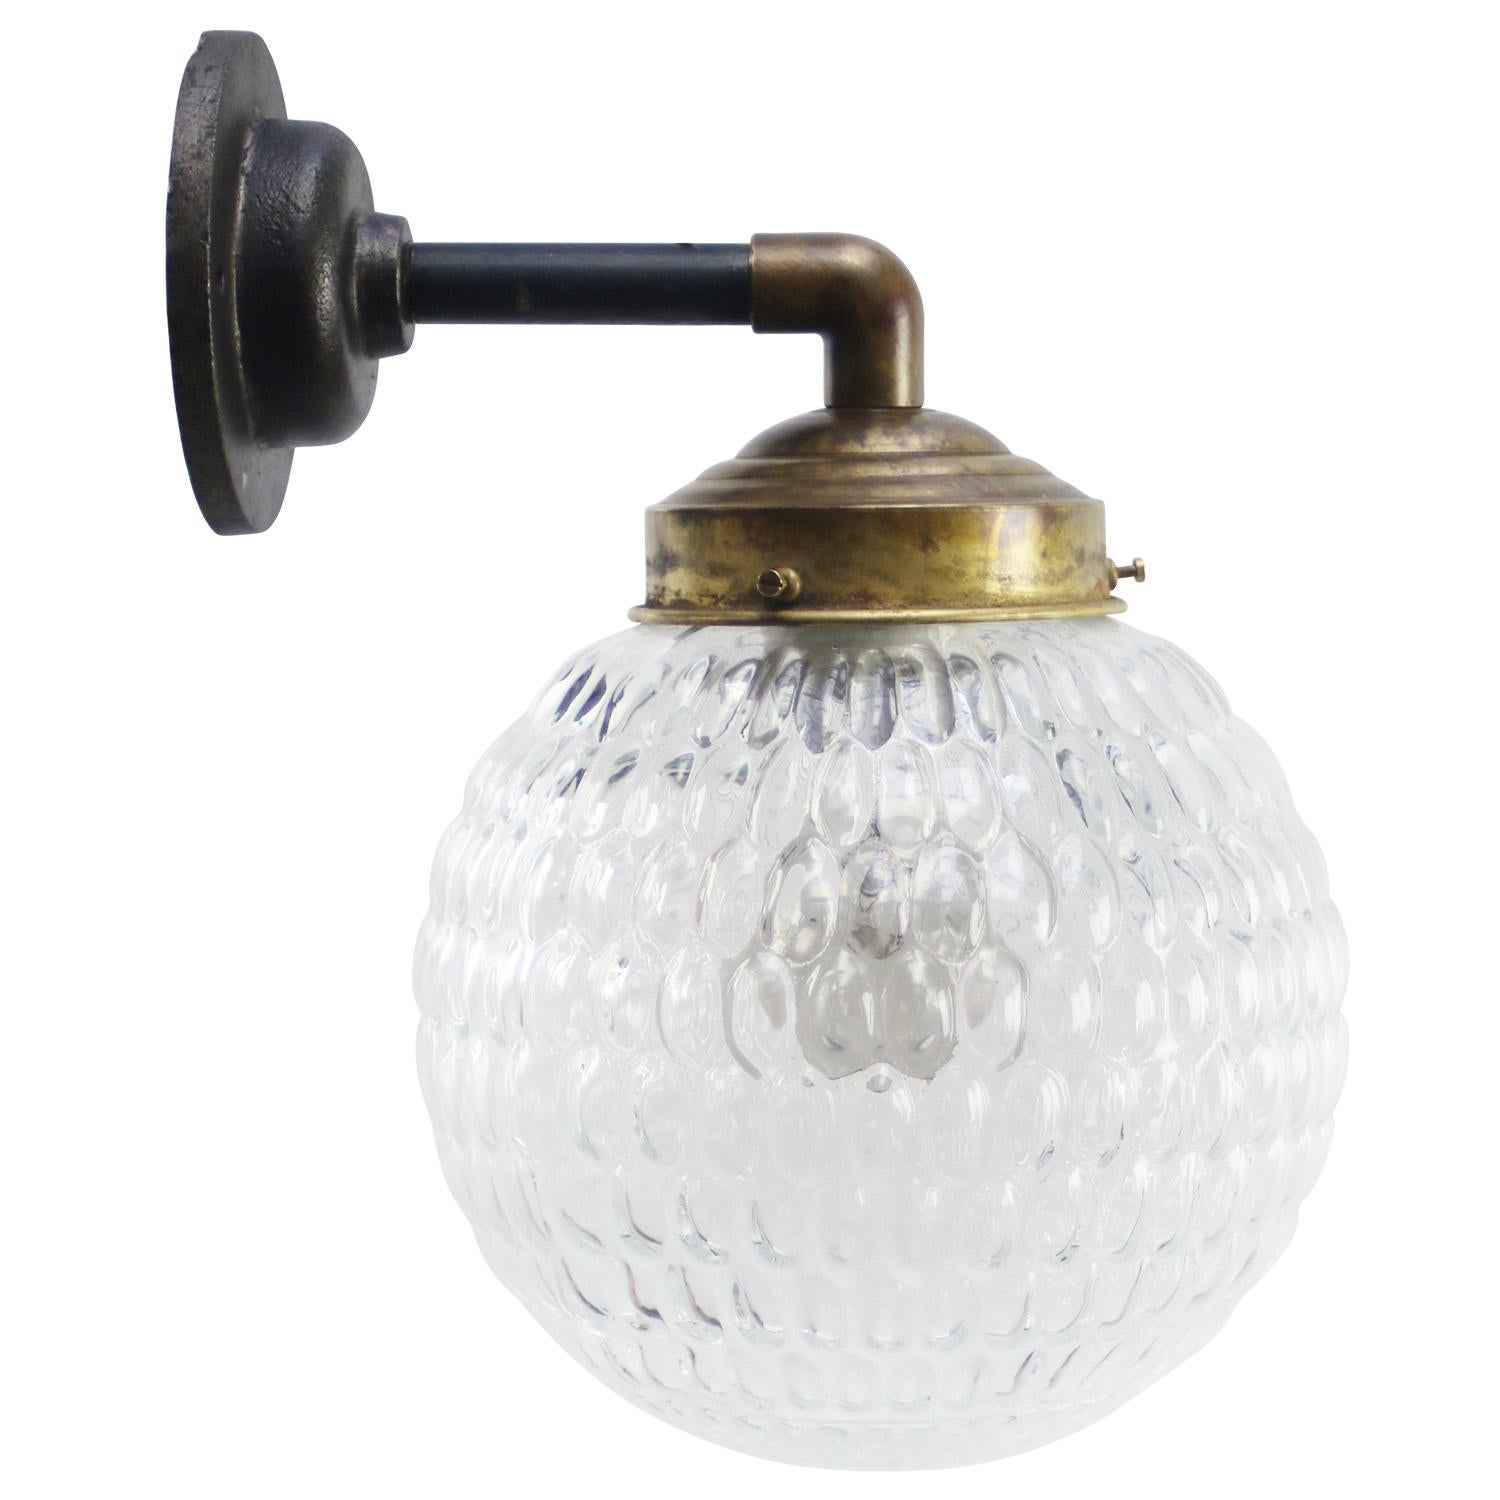 Brass and cast Iron Industrial wall light
clear bubble glass globe

Diameter cast iron wall piece: 10.5 cm / 4”, 2 holes to secure

Weight: 2.50 kg / 5.5 lb

Priced per individual item. All lamps have been made suitable by international standards